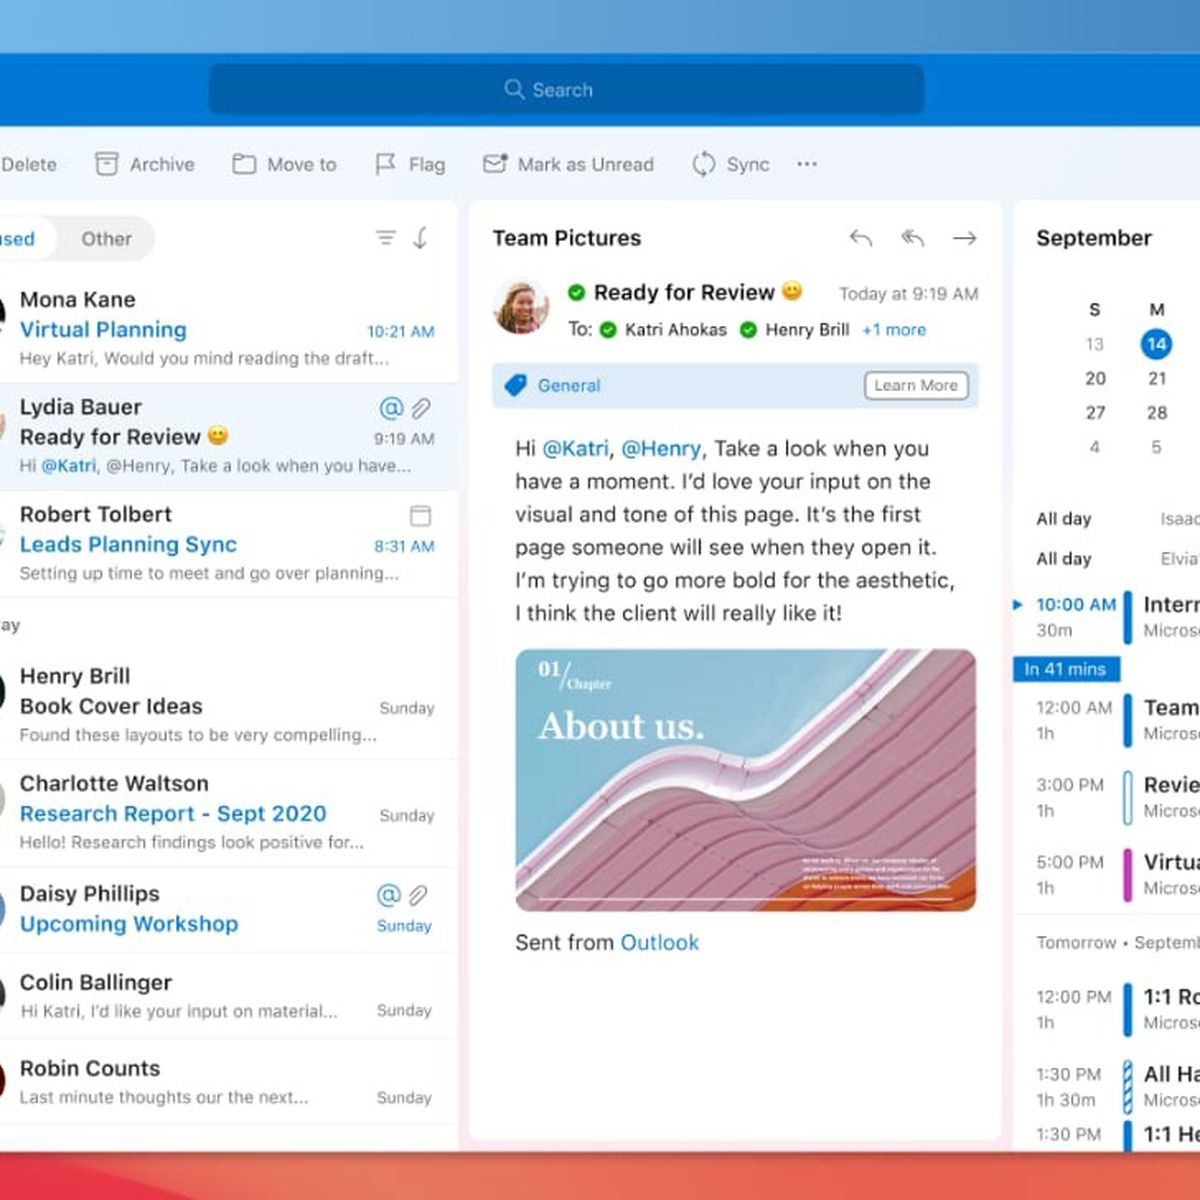 does outlook for mac integrate with any online task management services